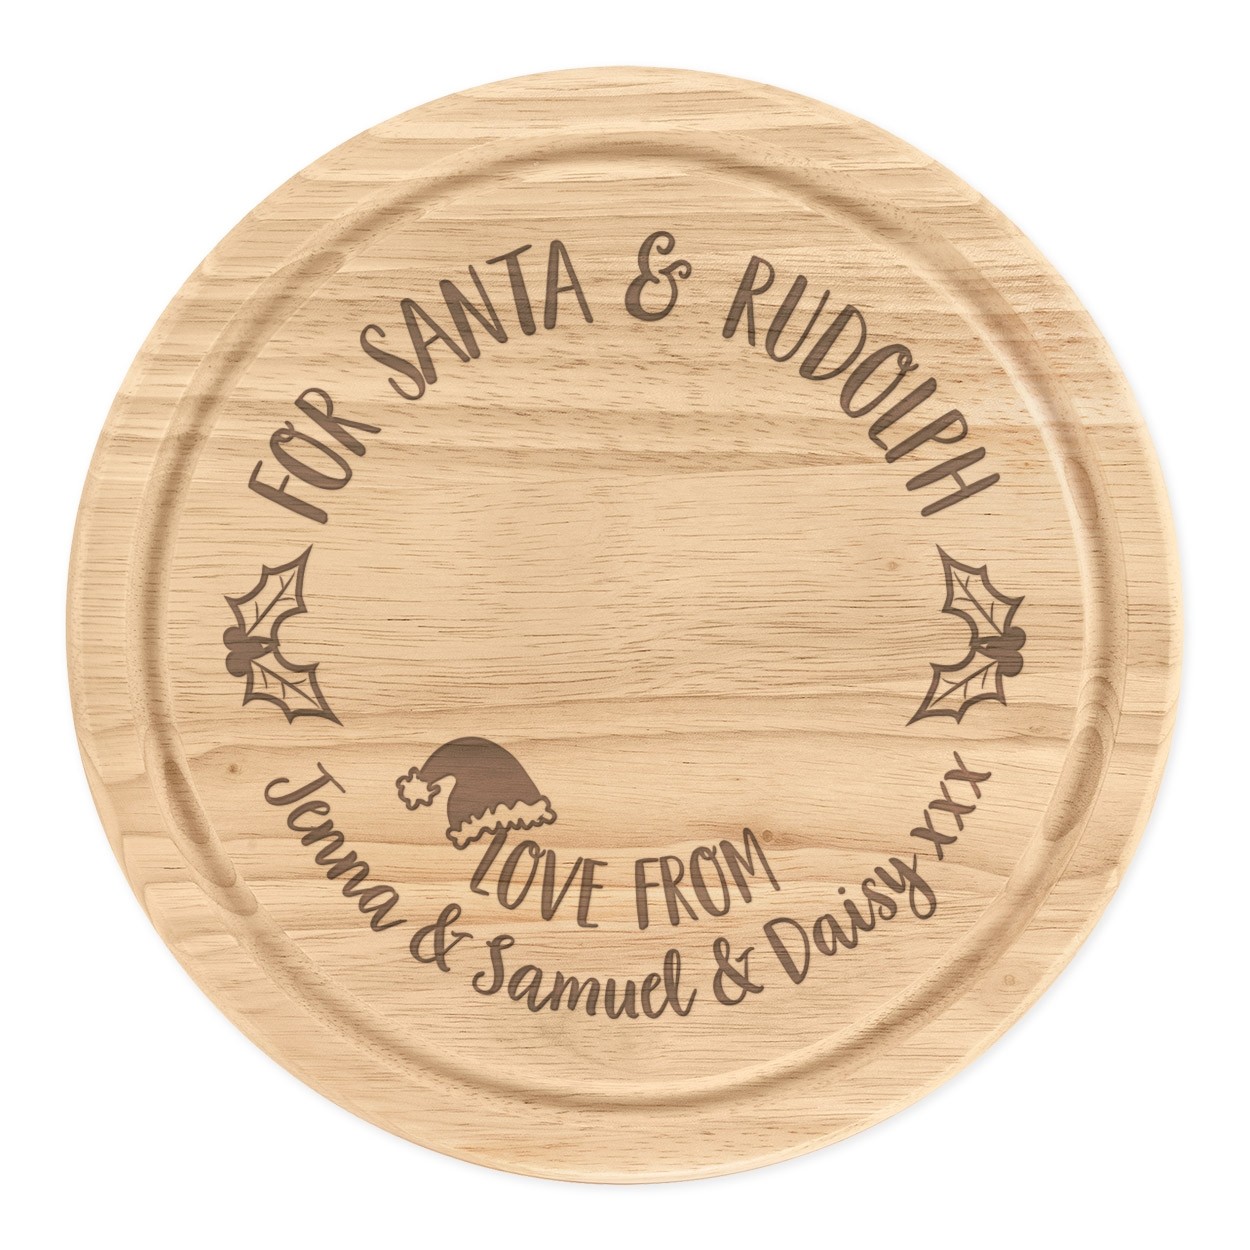 PPersonalised Christmas Eve Treat Board Classic Santa Round 25cm Wooden Snack Father Christmas Rudolf Custom